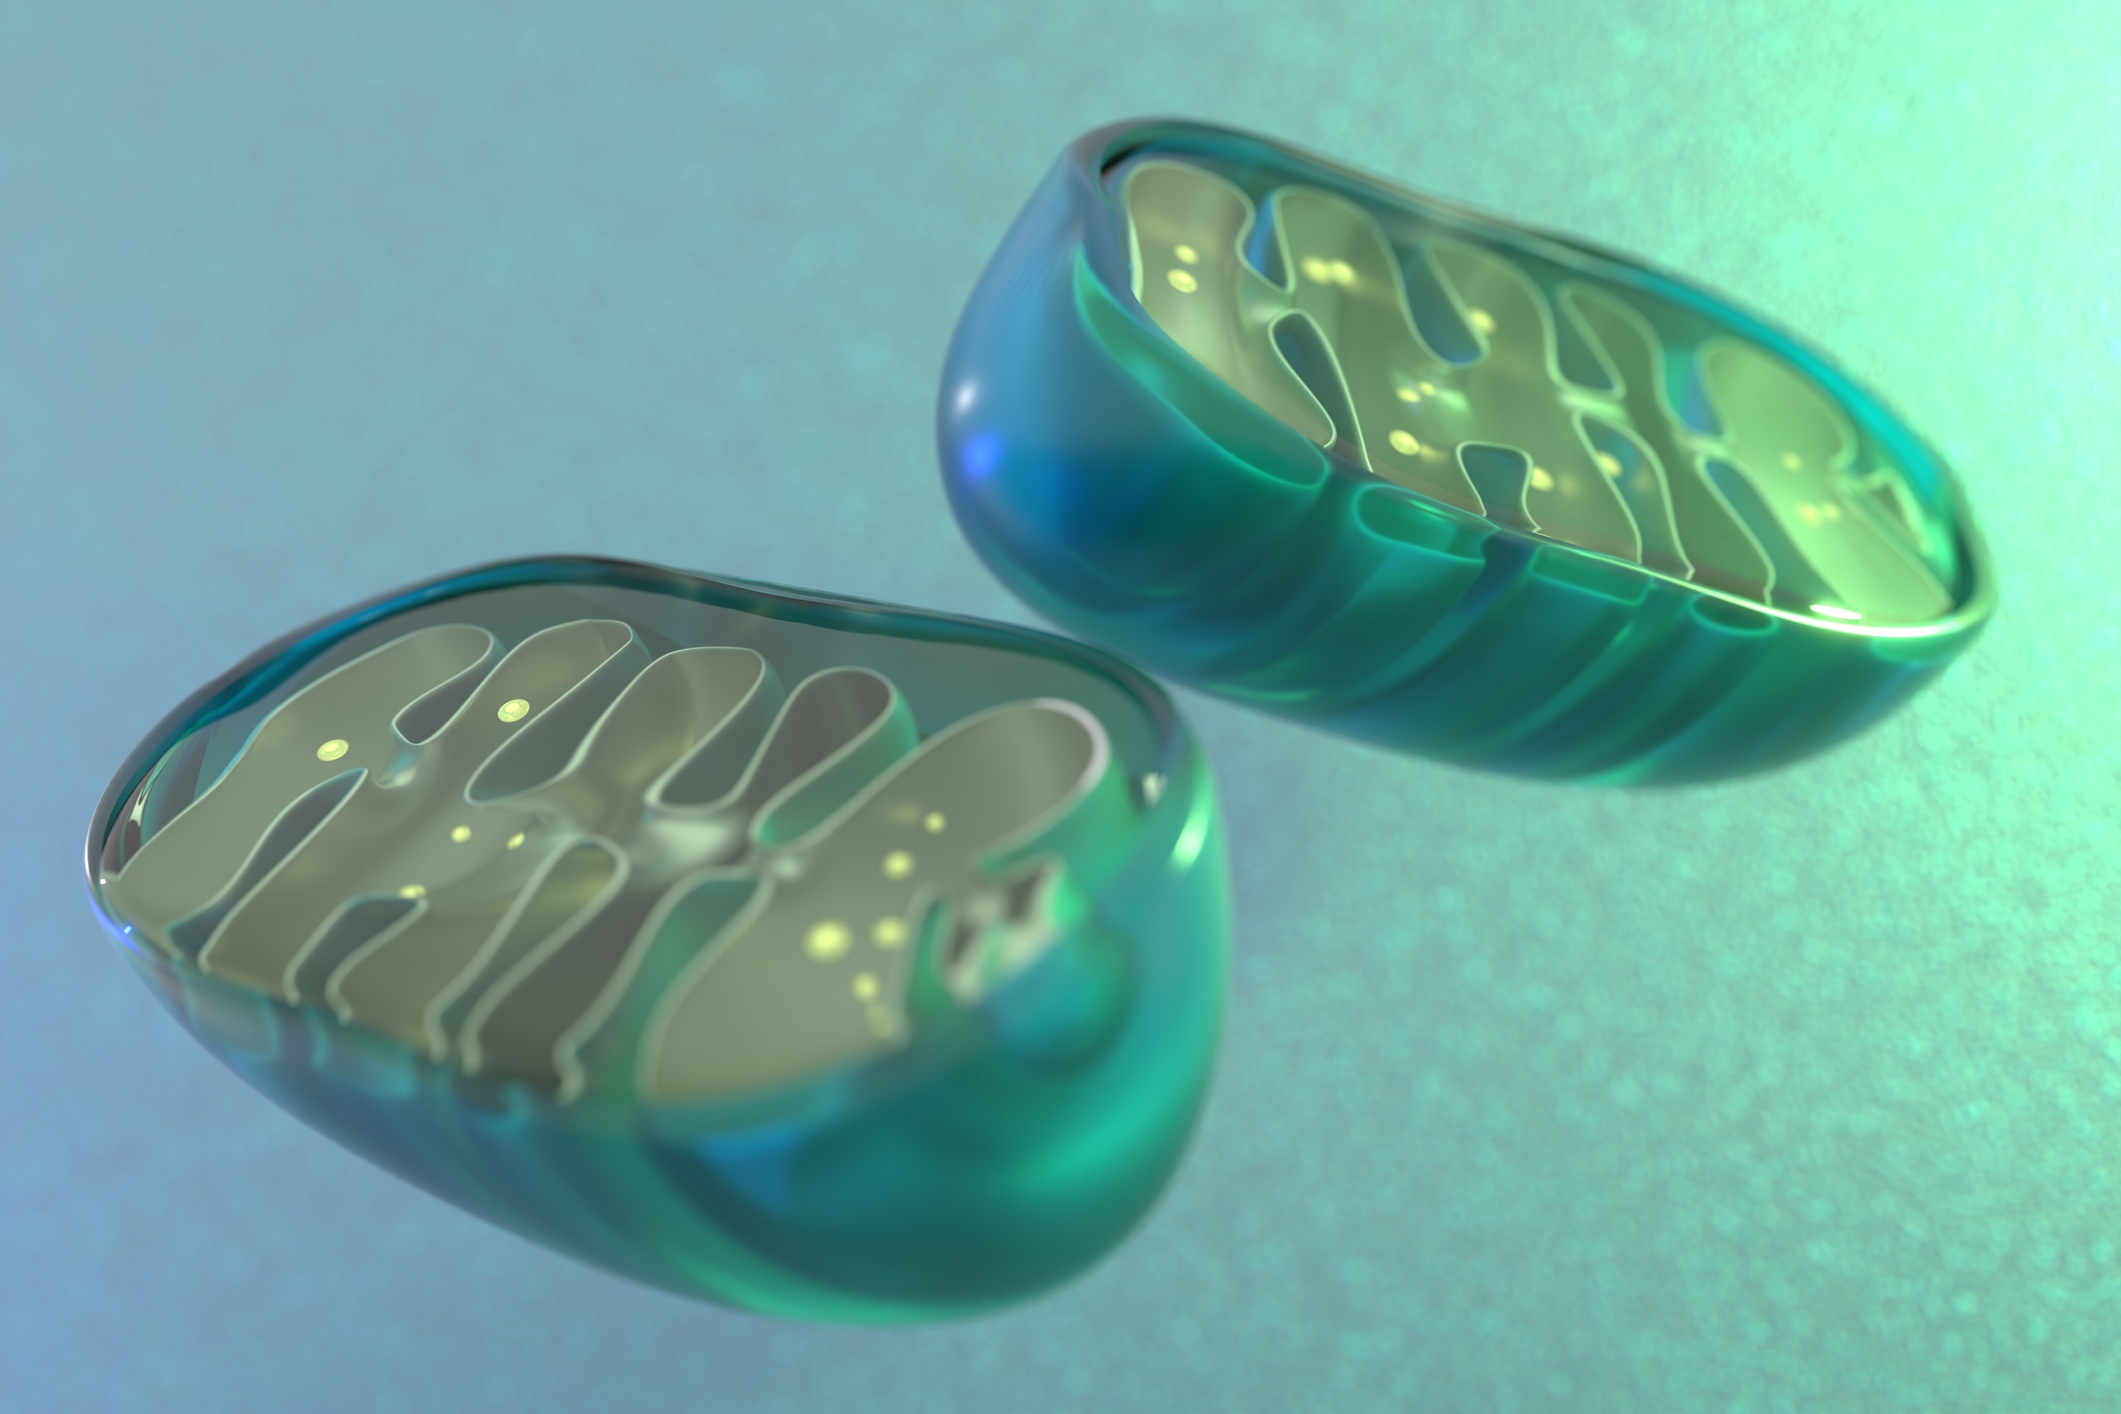 Zen and the art of mitochondrial maintenance: The machinery of death makes a healthier life